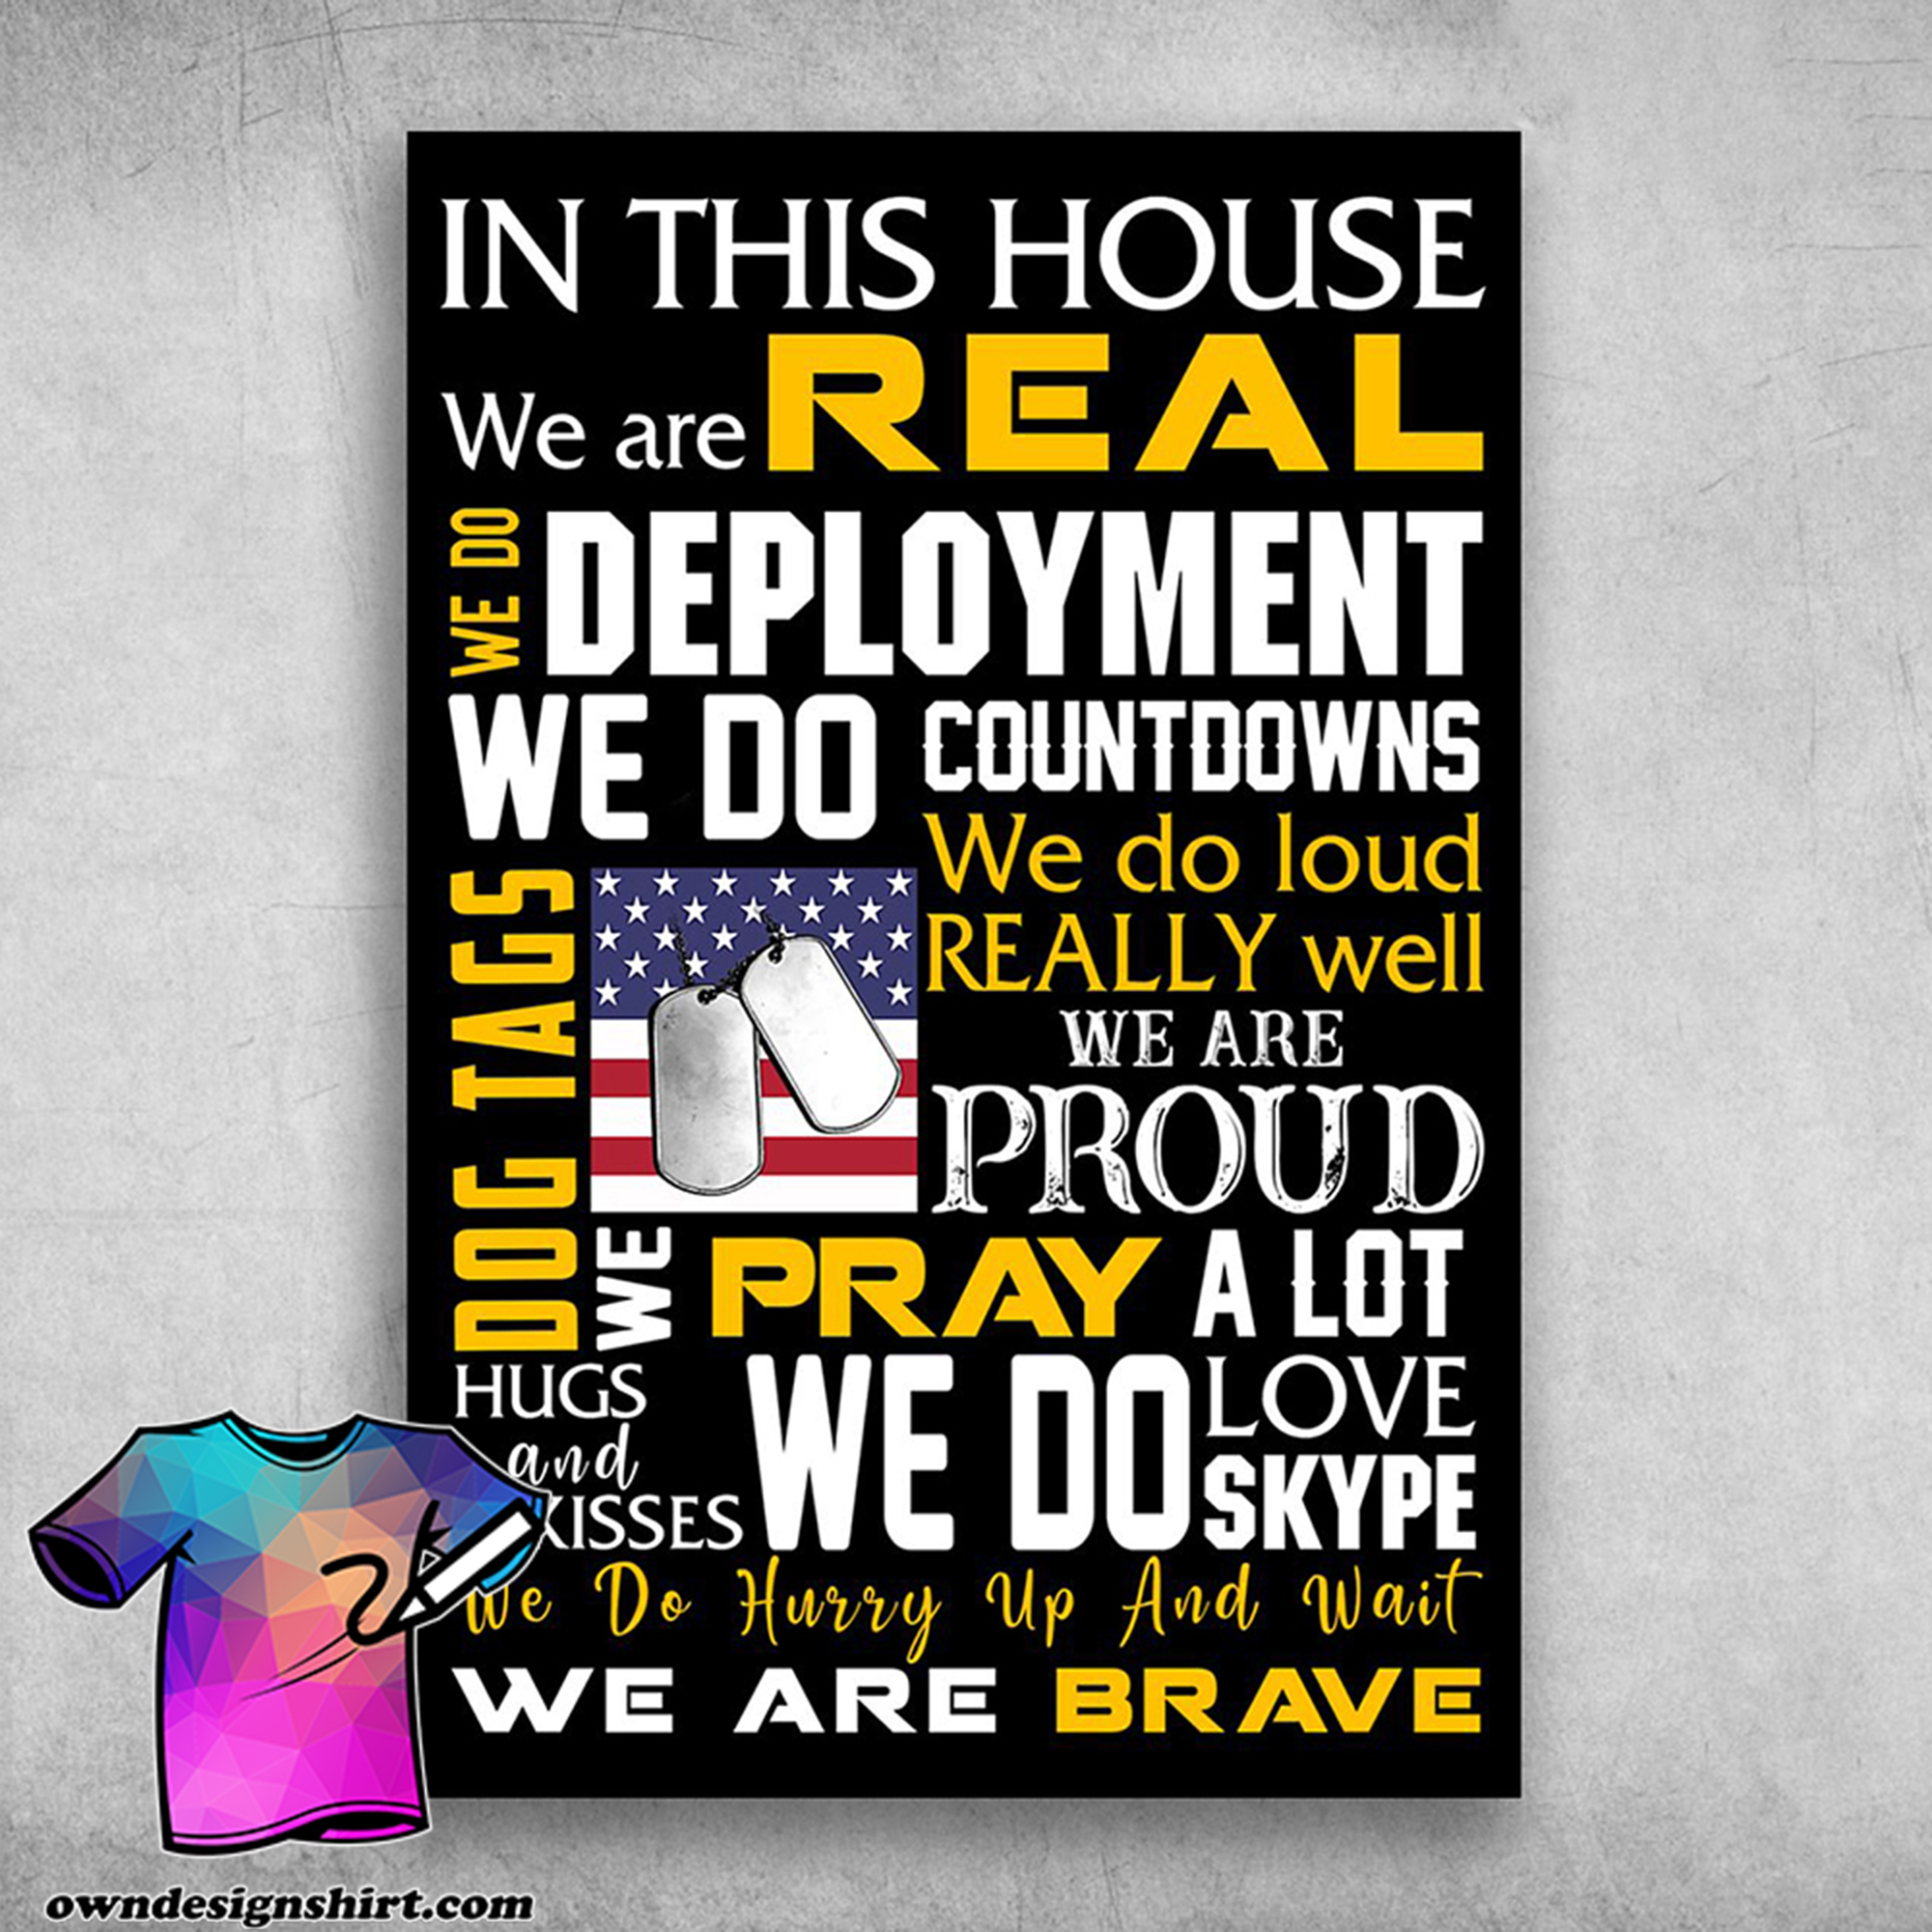 In this house we are real we are brave american army poster